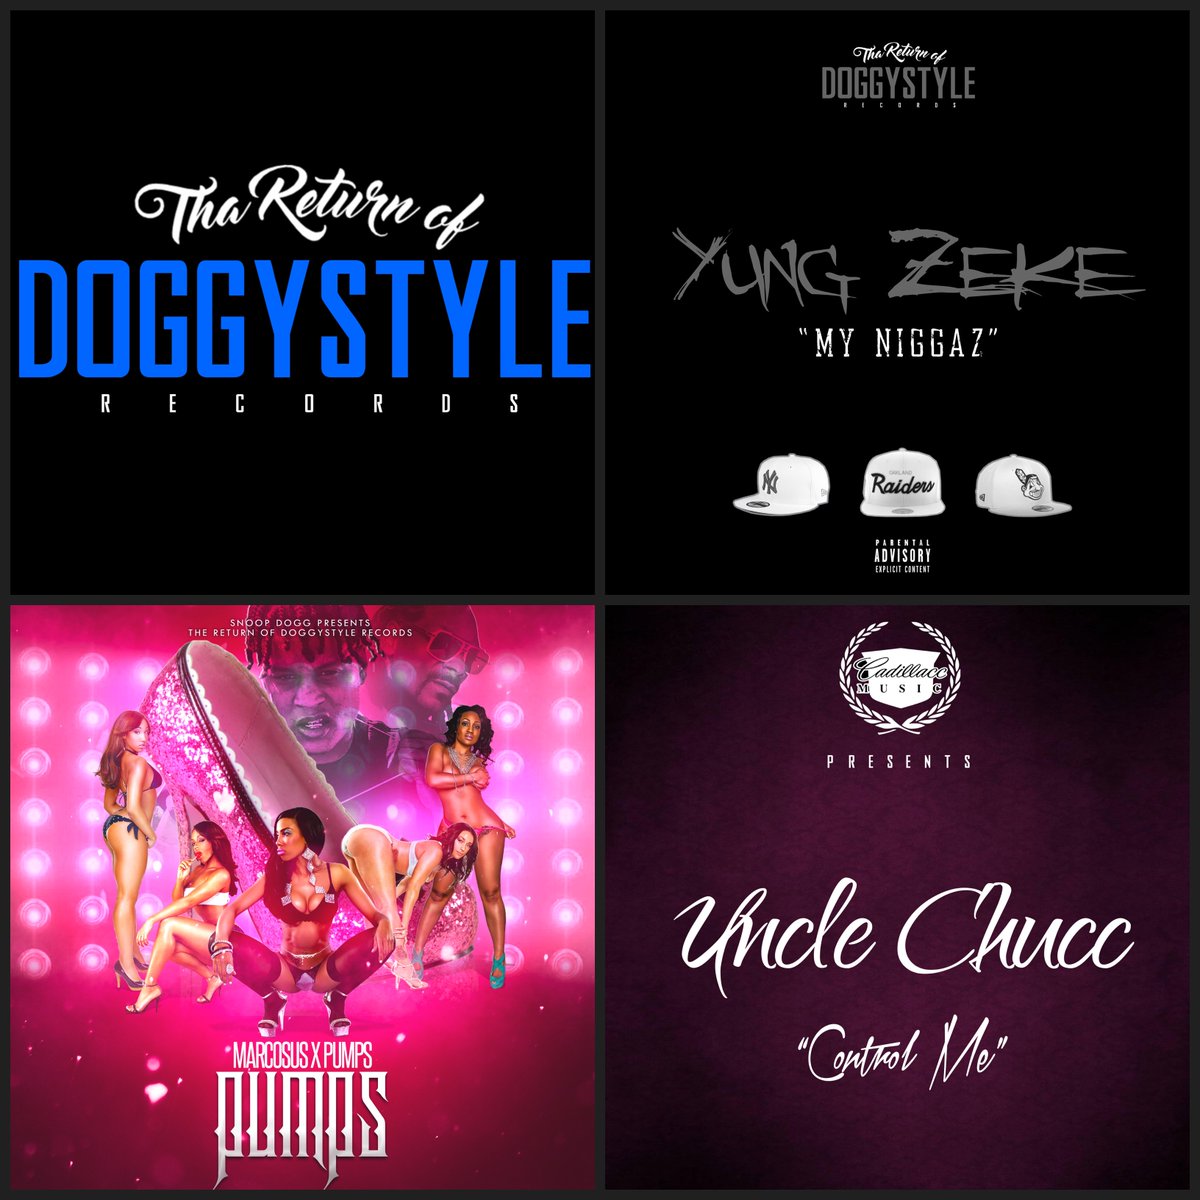 #DoggystyleTuesdays new singles frm @Marcosus @Unclechucc & #YungZeke !! #DoggyStyleRecords https://t.co/9XlP32pqG6 https://t.co/pggYQKAtc6